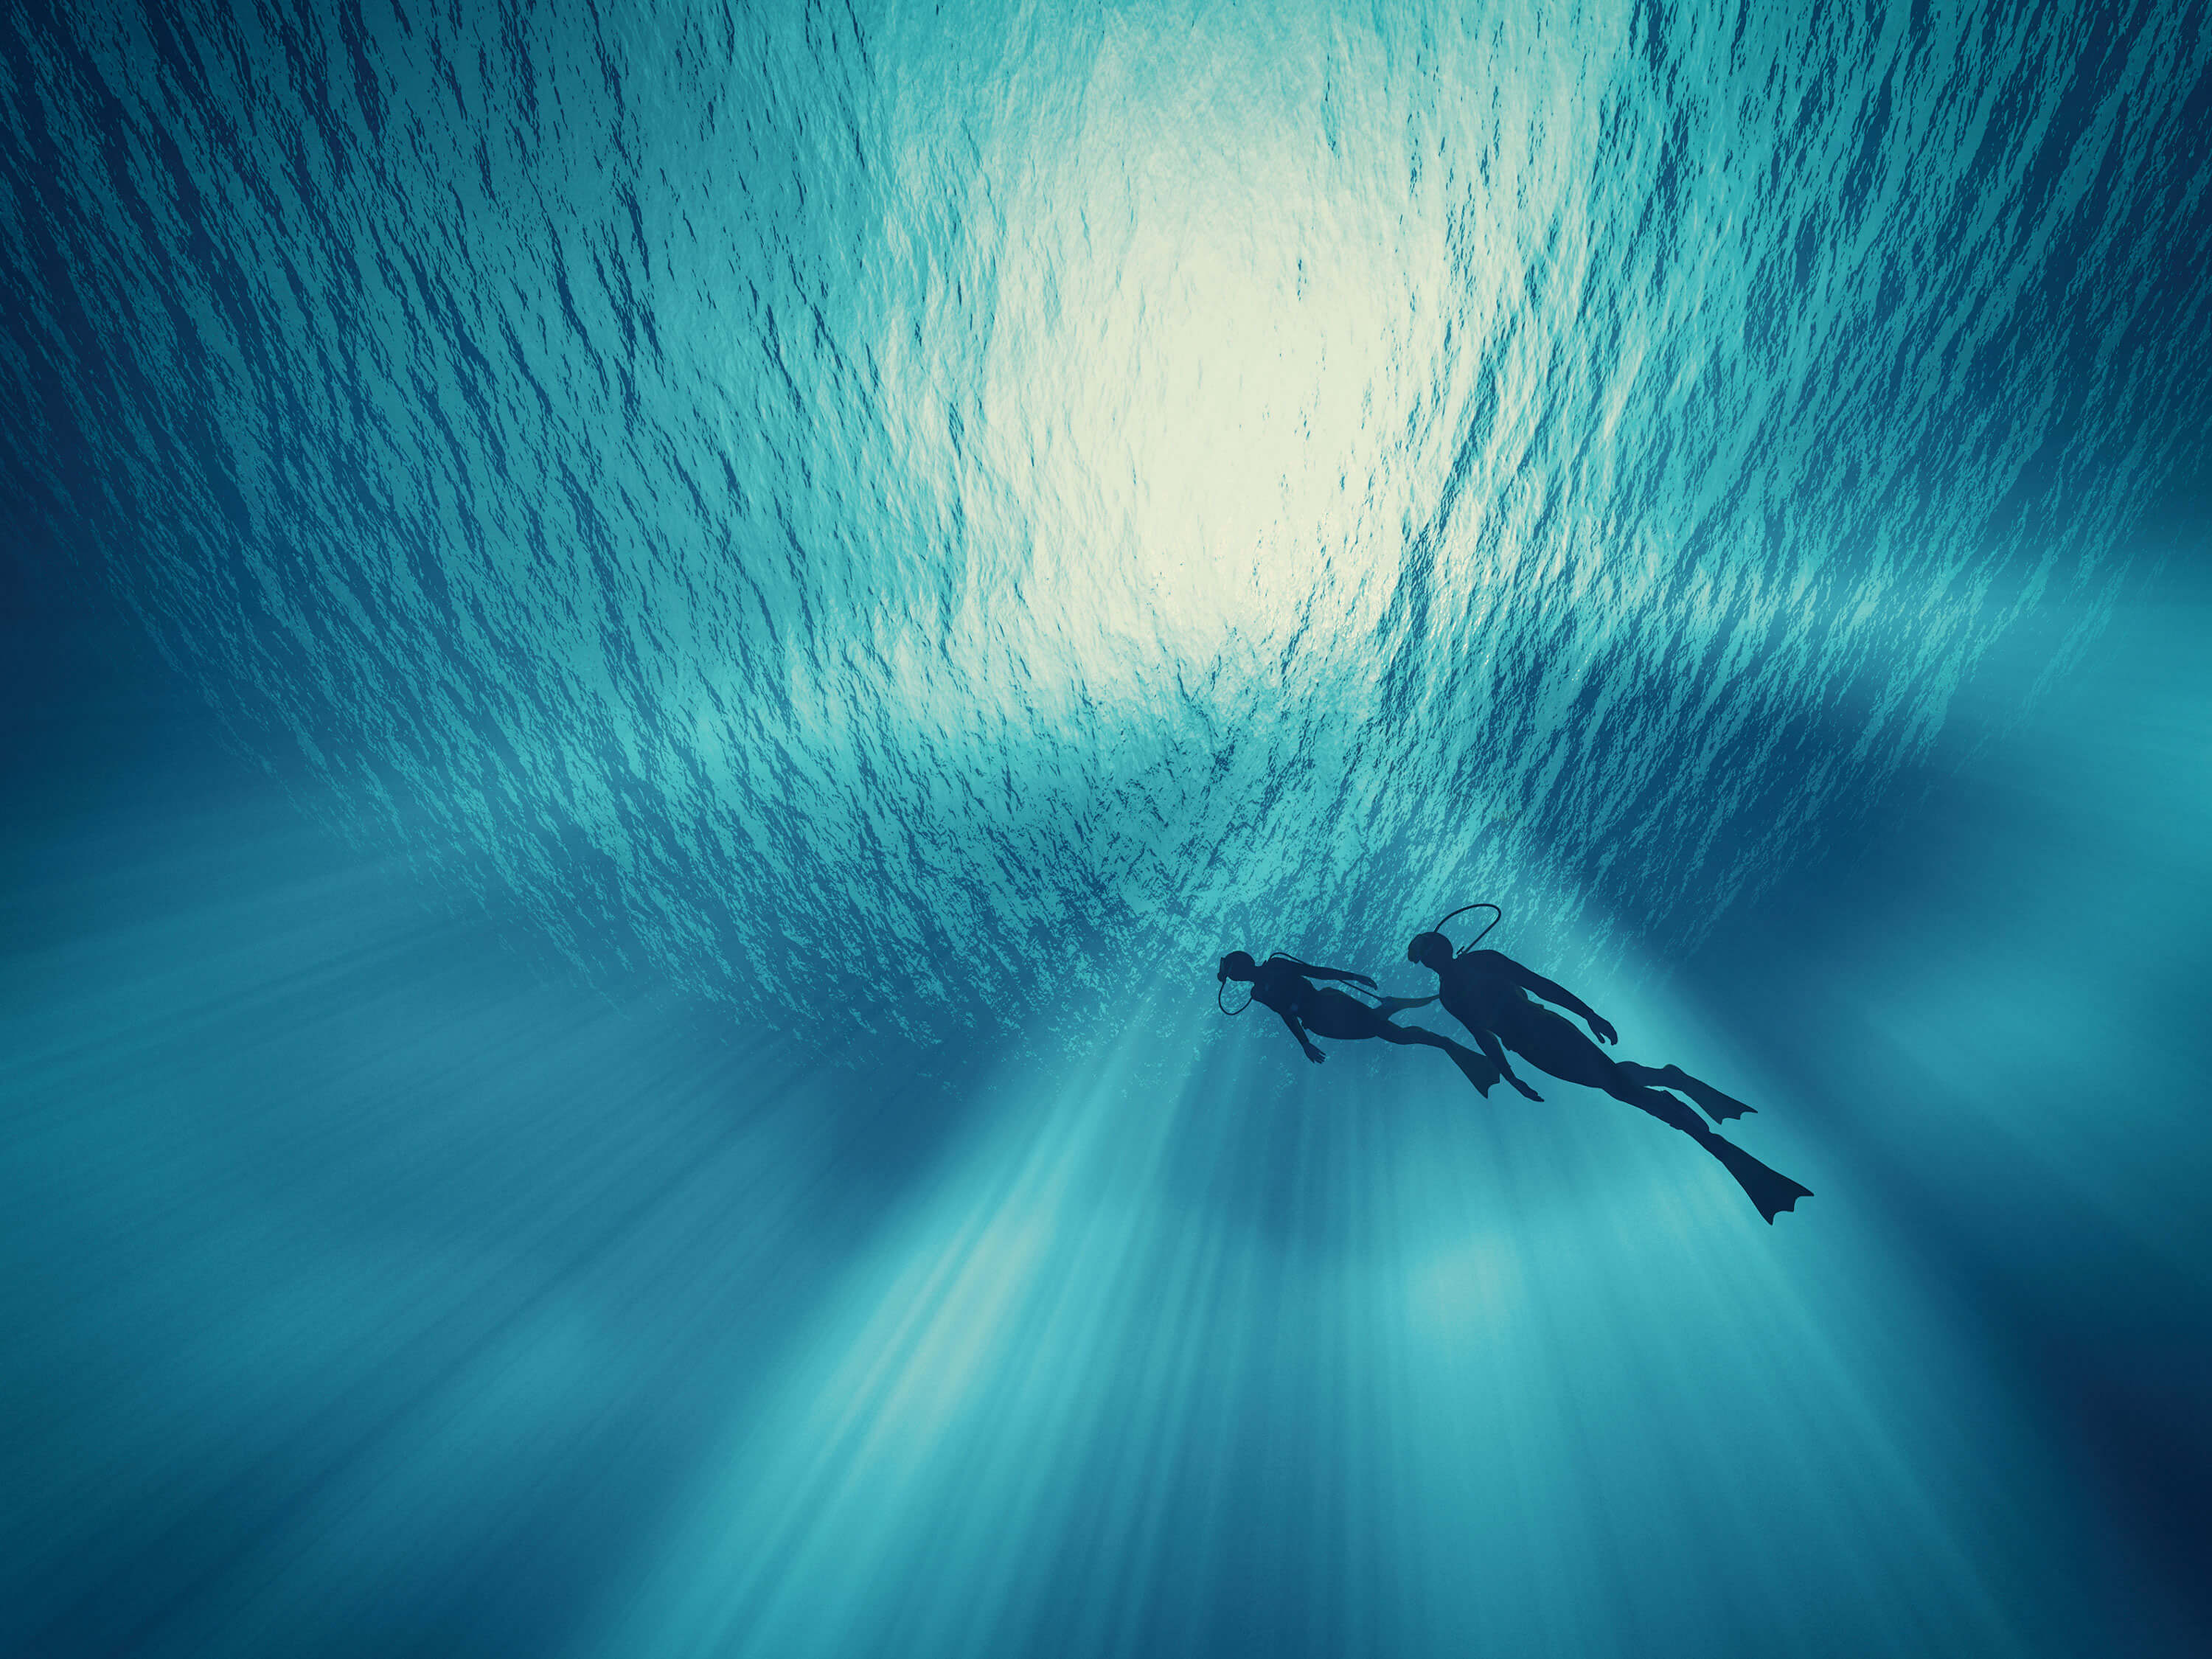 Two scuba divers swimming in blue waters